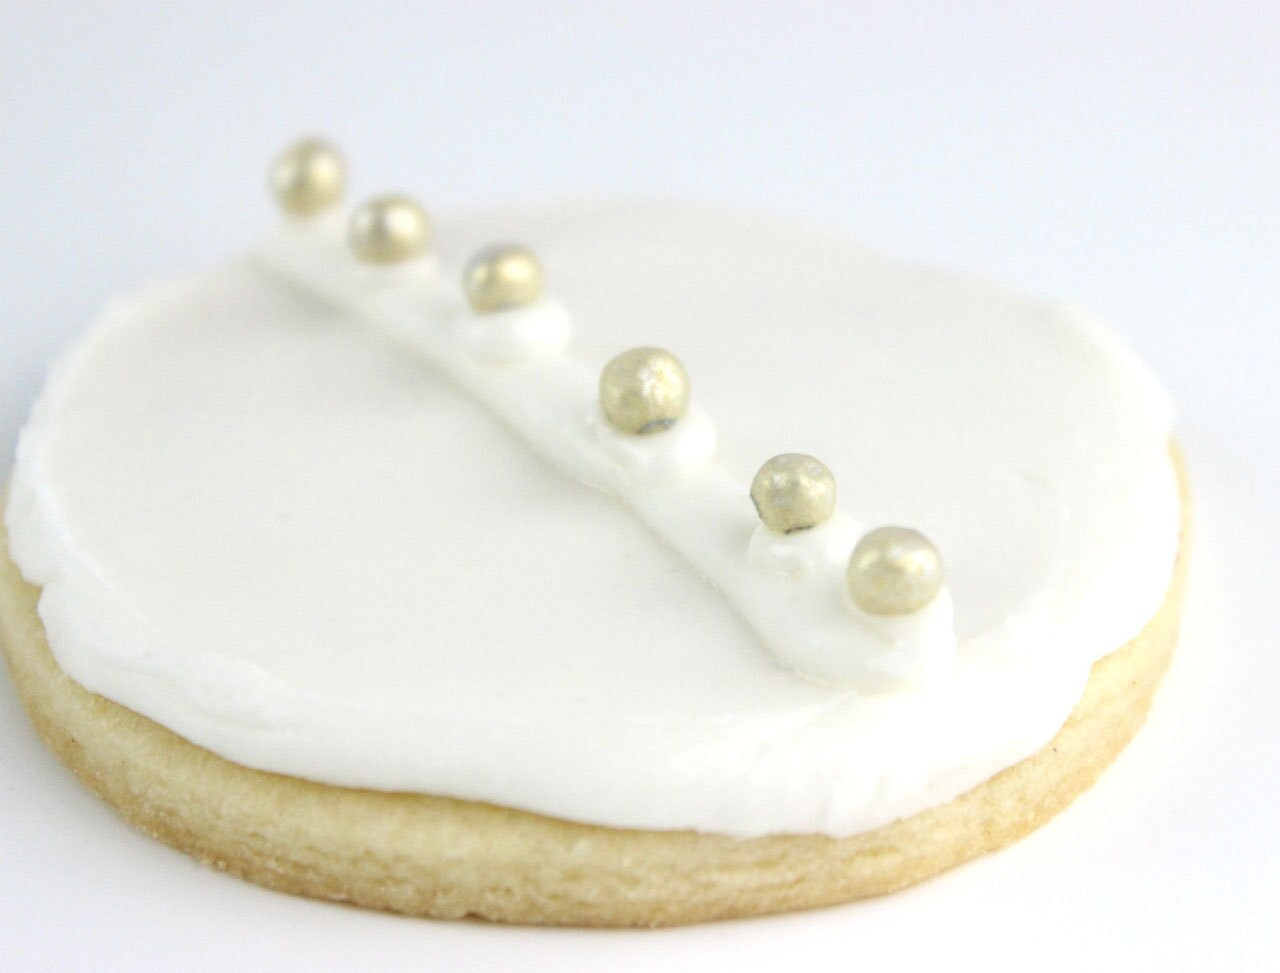 A cookie decorated with white icing and edible silver pearls.